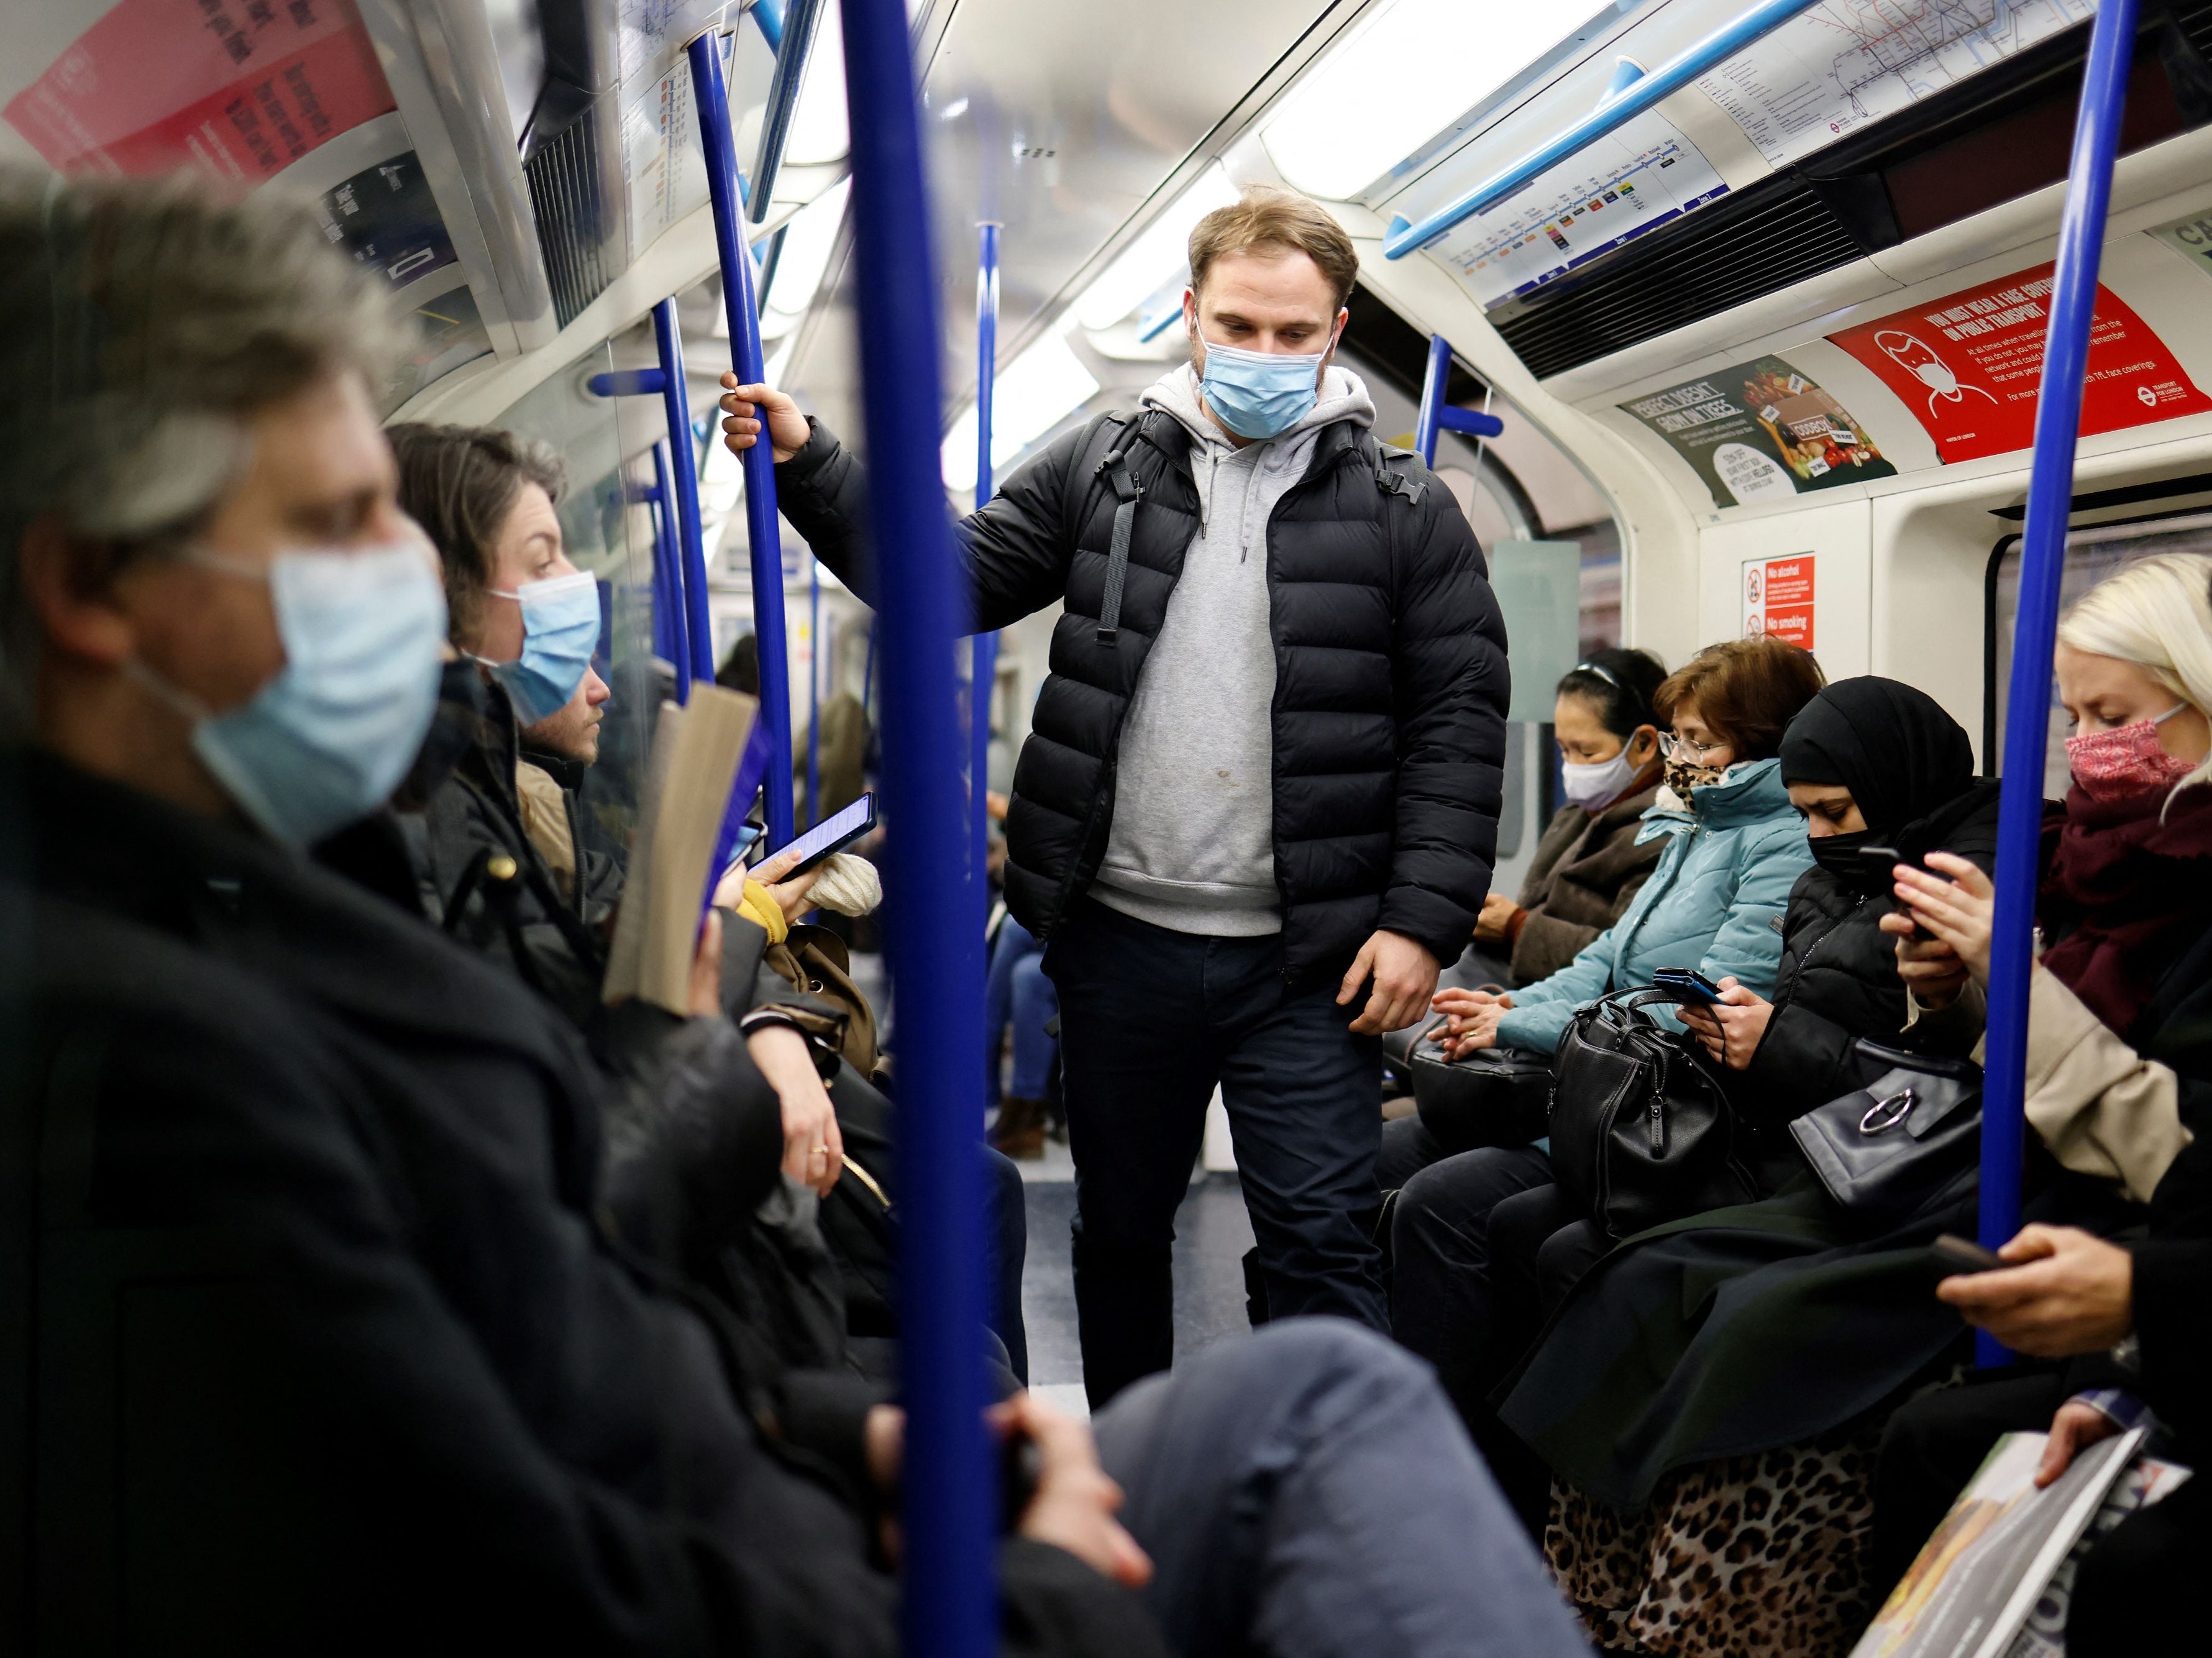 Rules requiring people to wear masks on public transport could be ended early